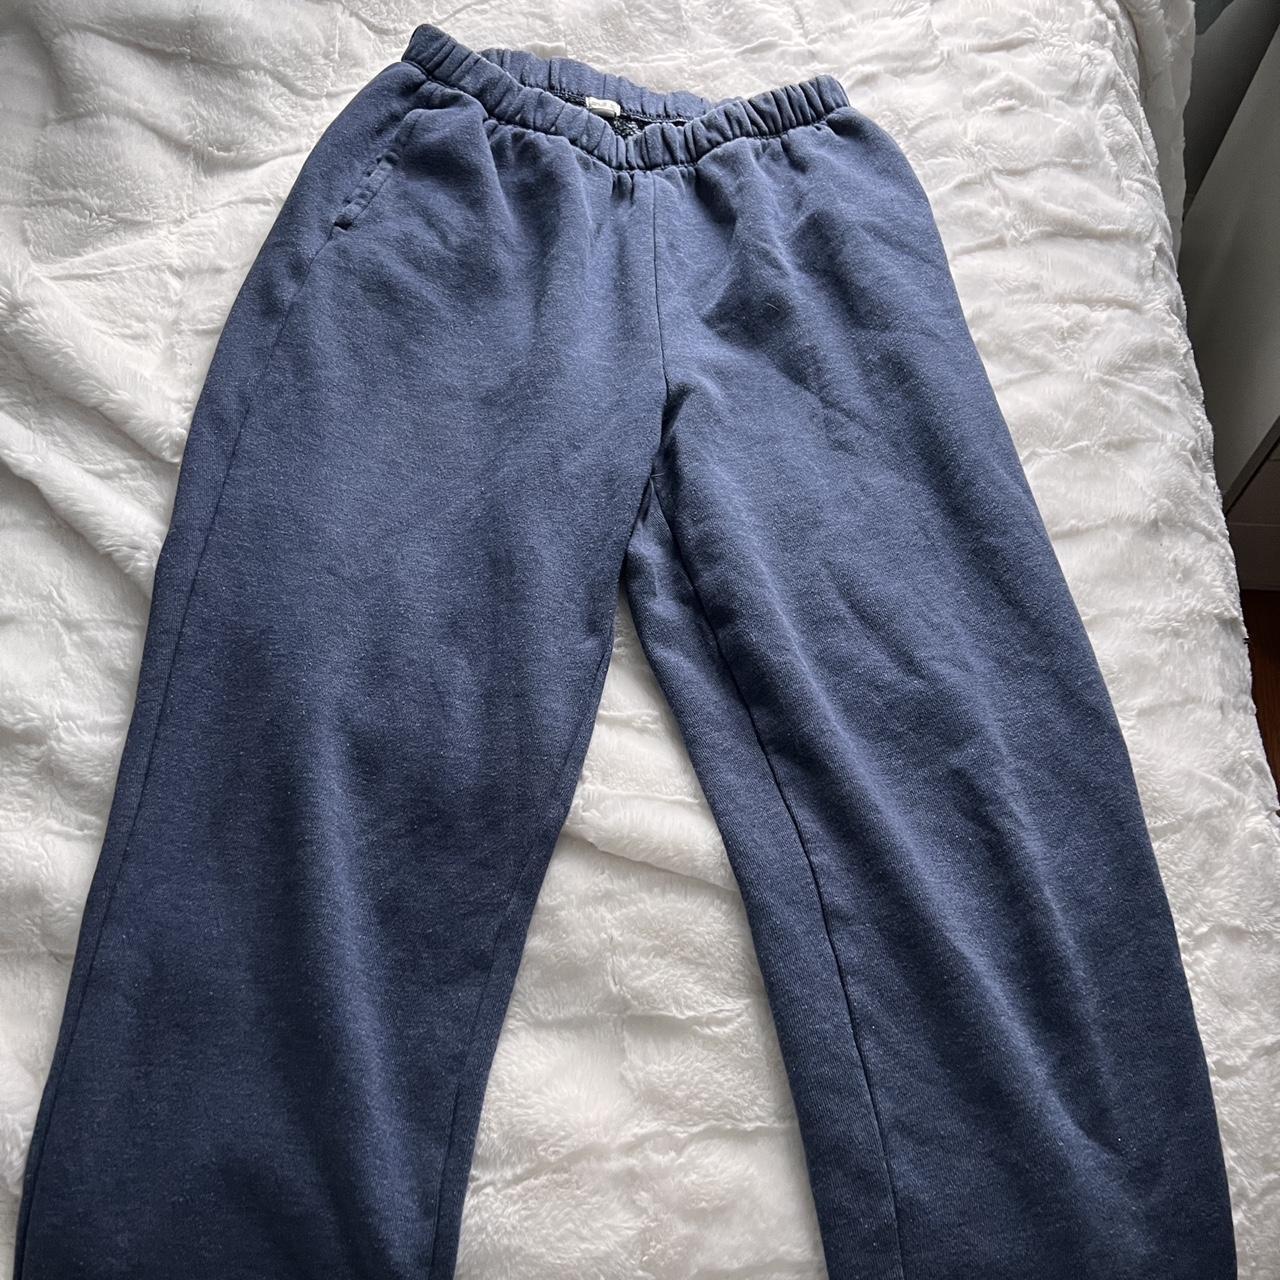 Aerie Women's Blue Joggers-tracksuits (4)